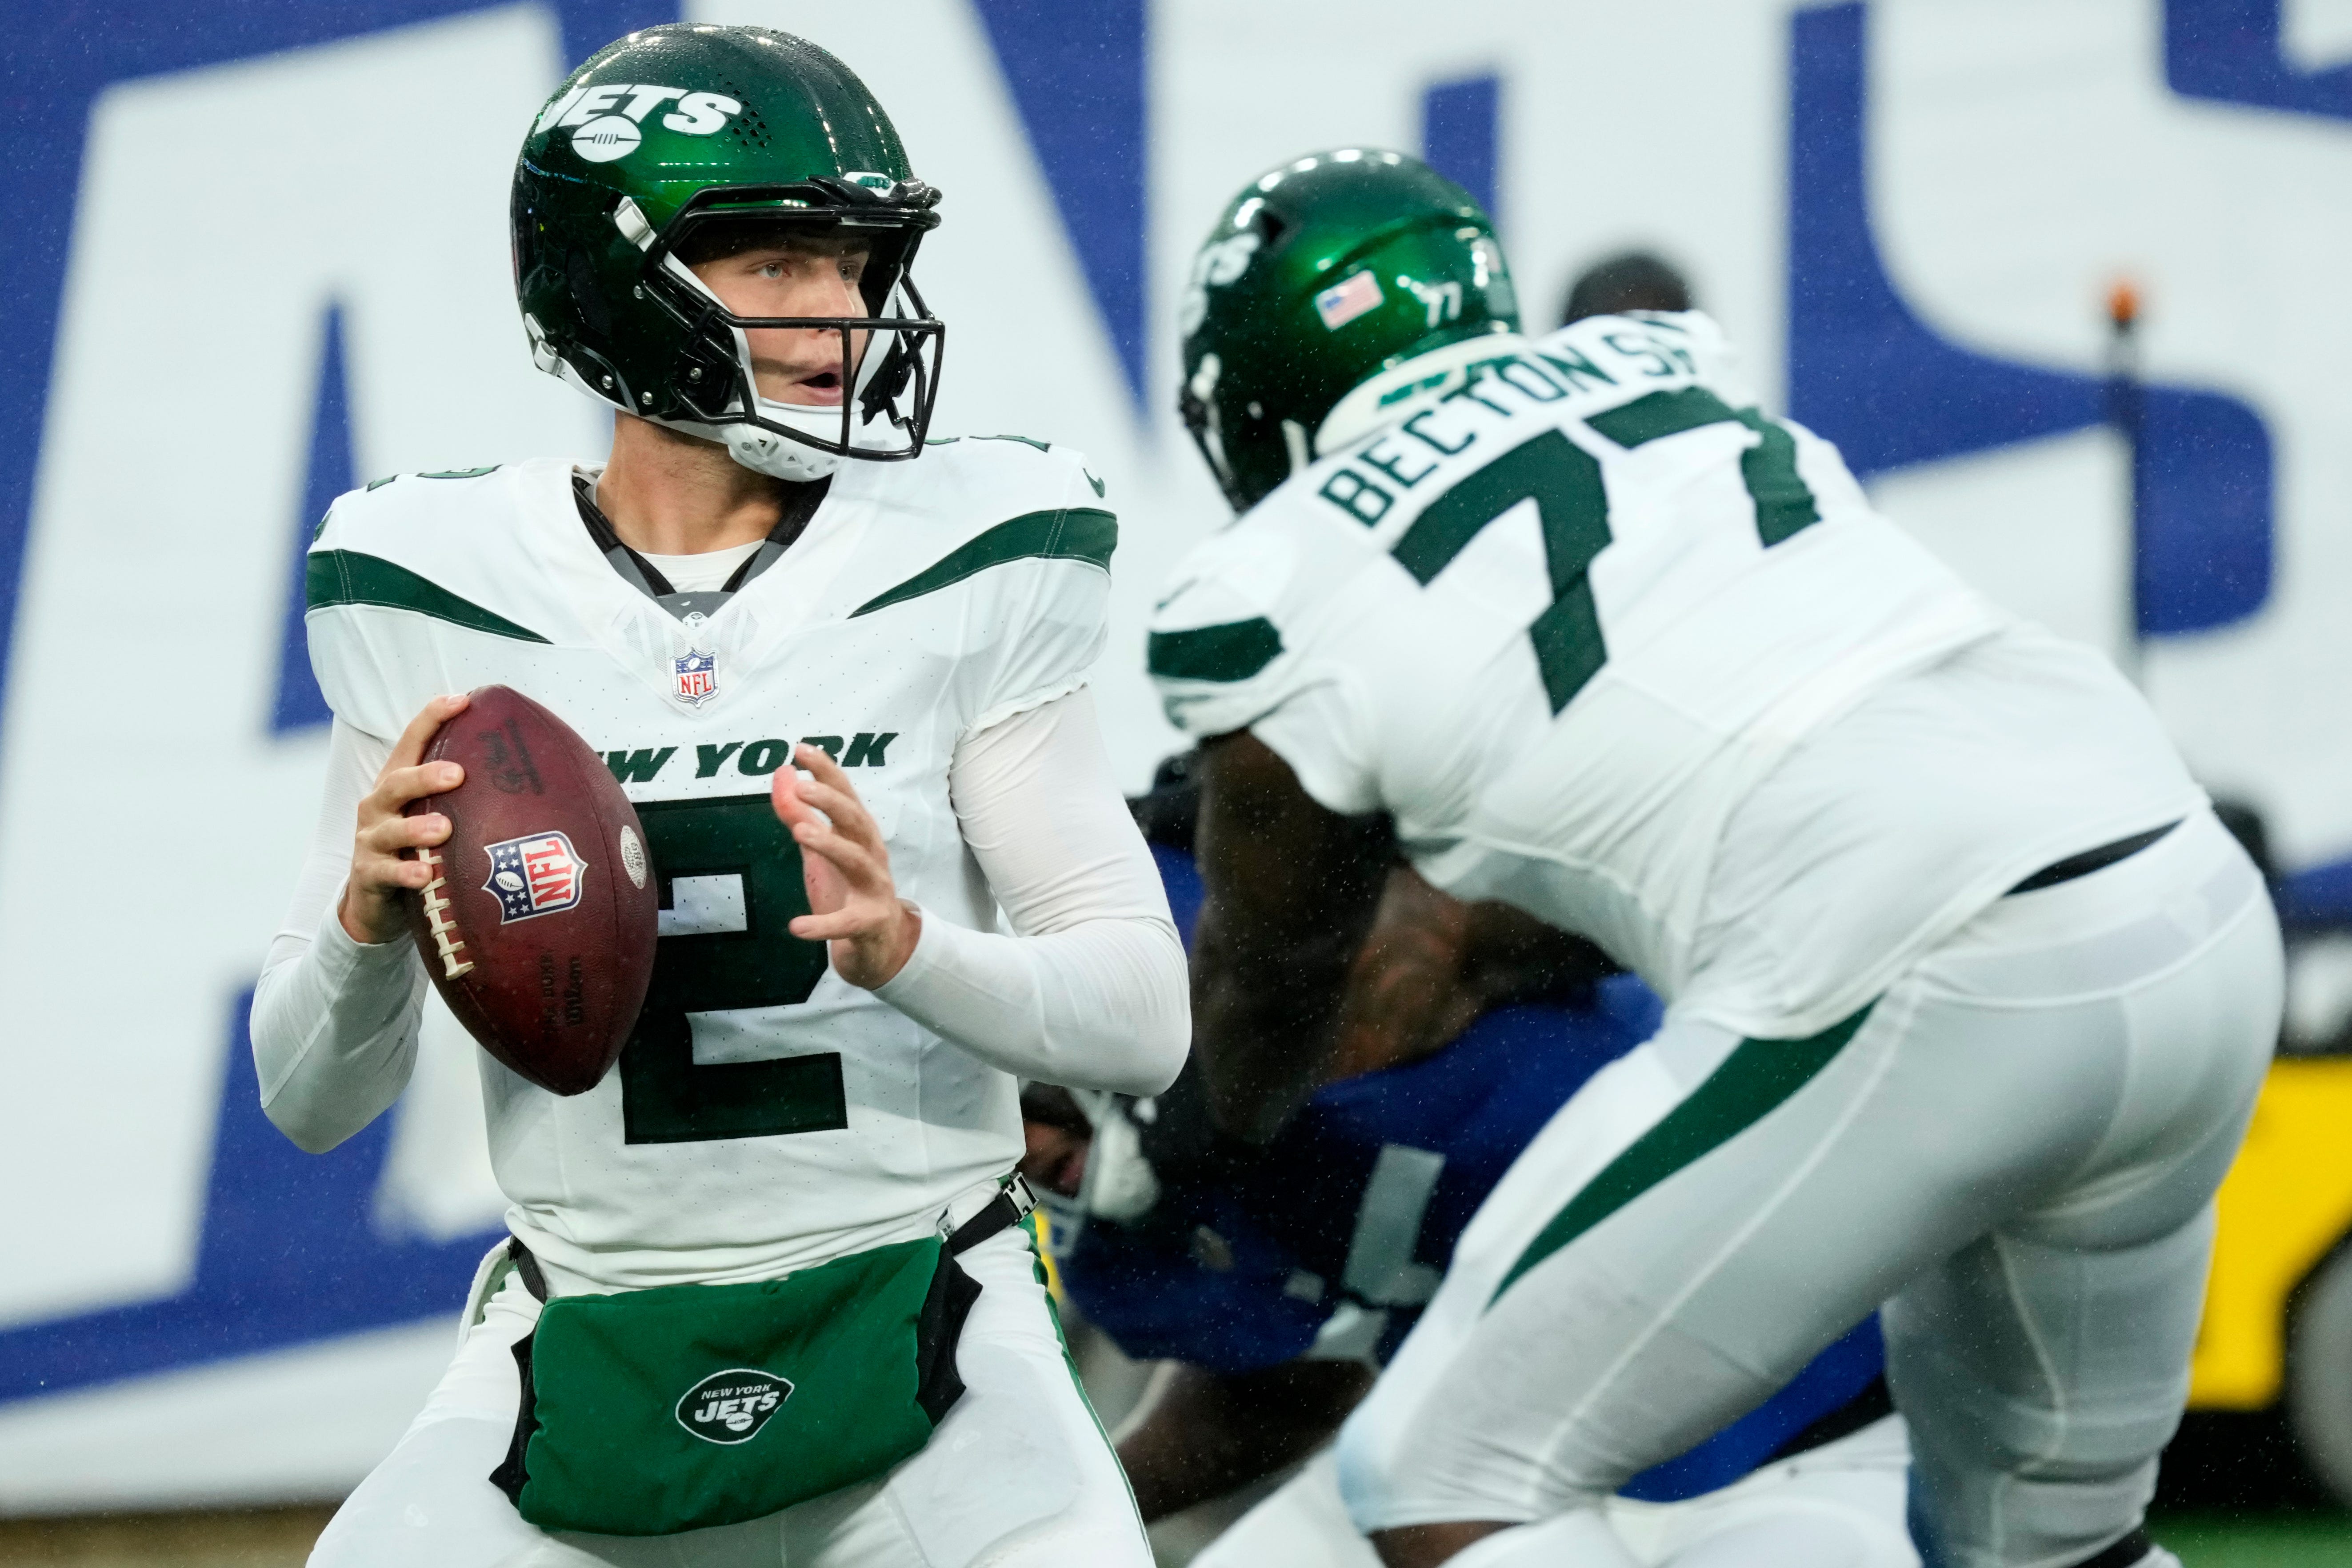 Odds, preview, and Chargers vs. Jets prediction for Monday Night Football. Plus, learn how to score $200 in bonus bets from DraftKings Sportsbook.